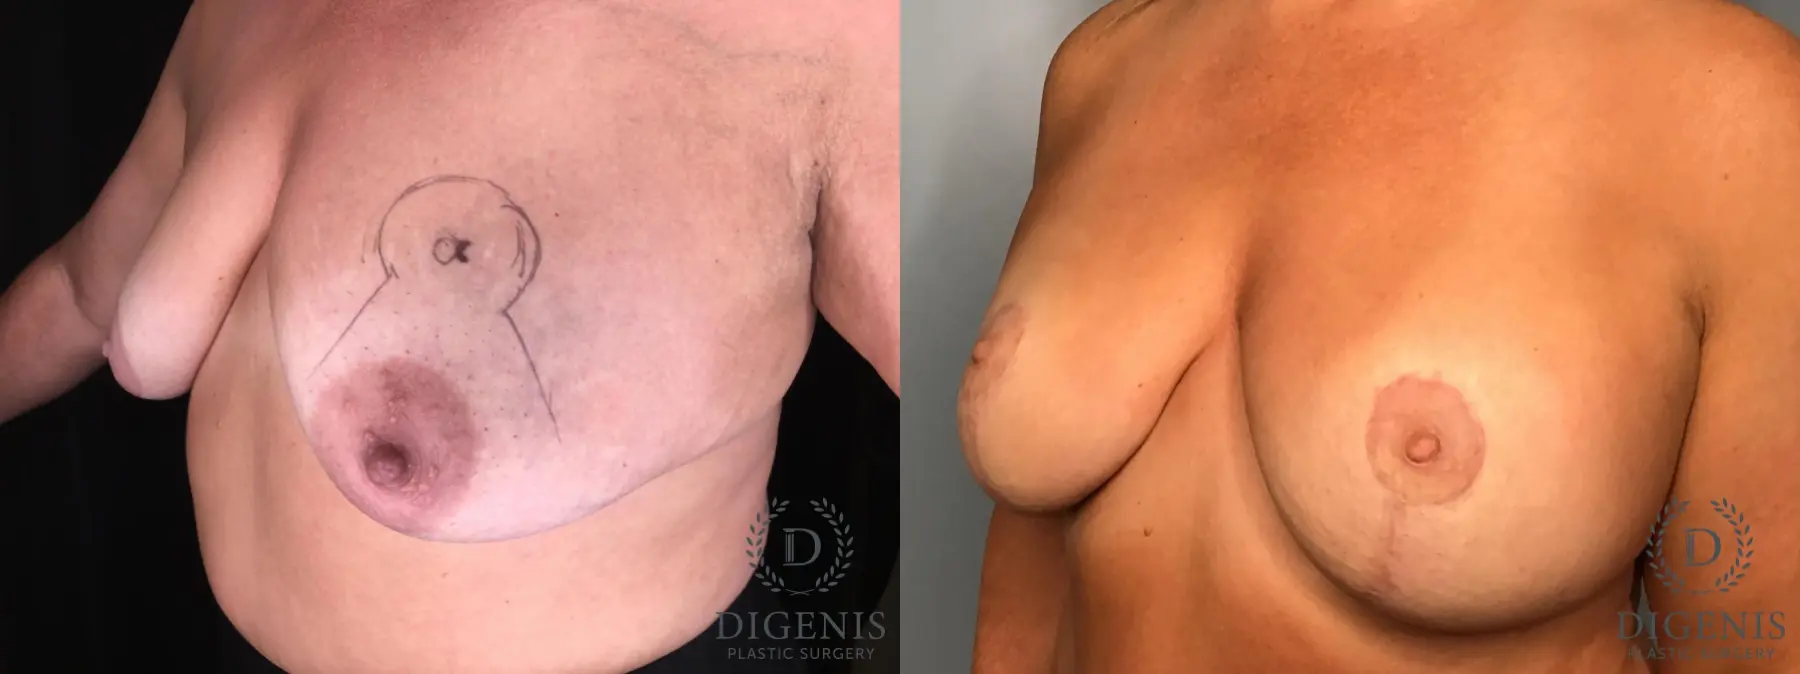 Mastopexy: Patient 2 - Before and After 2